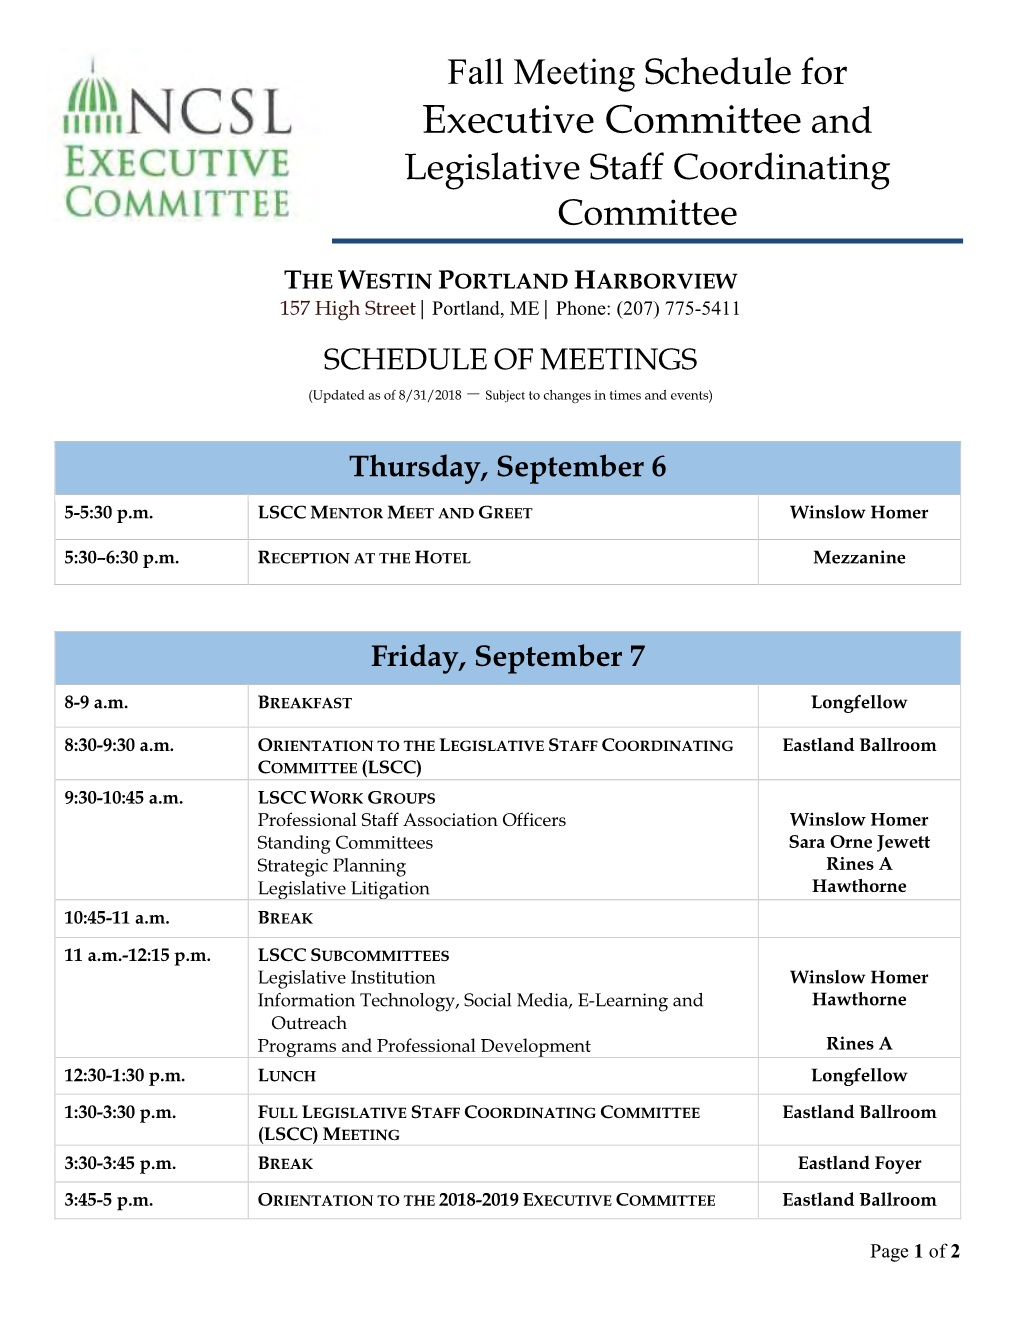 Fall Meeting Schedule for Executive Committee and Legislative Staff Coordinating Committee